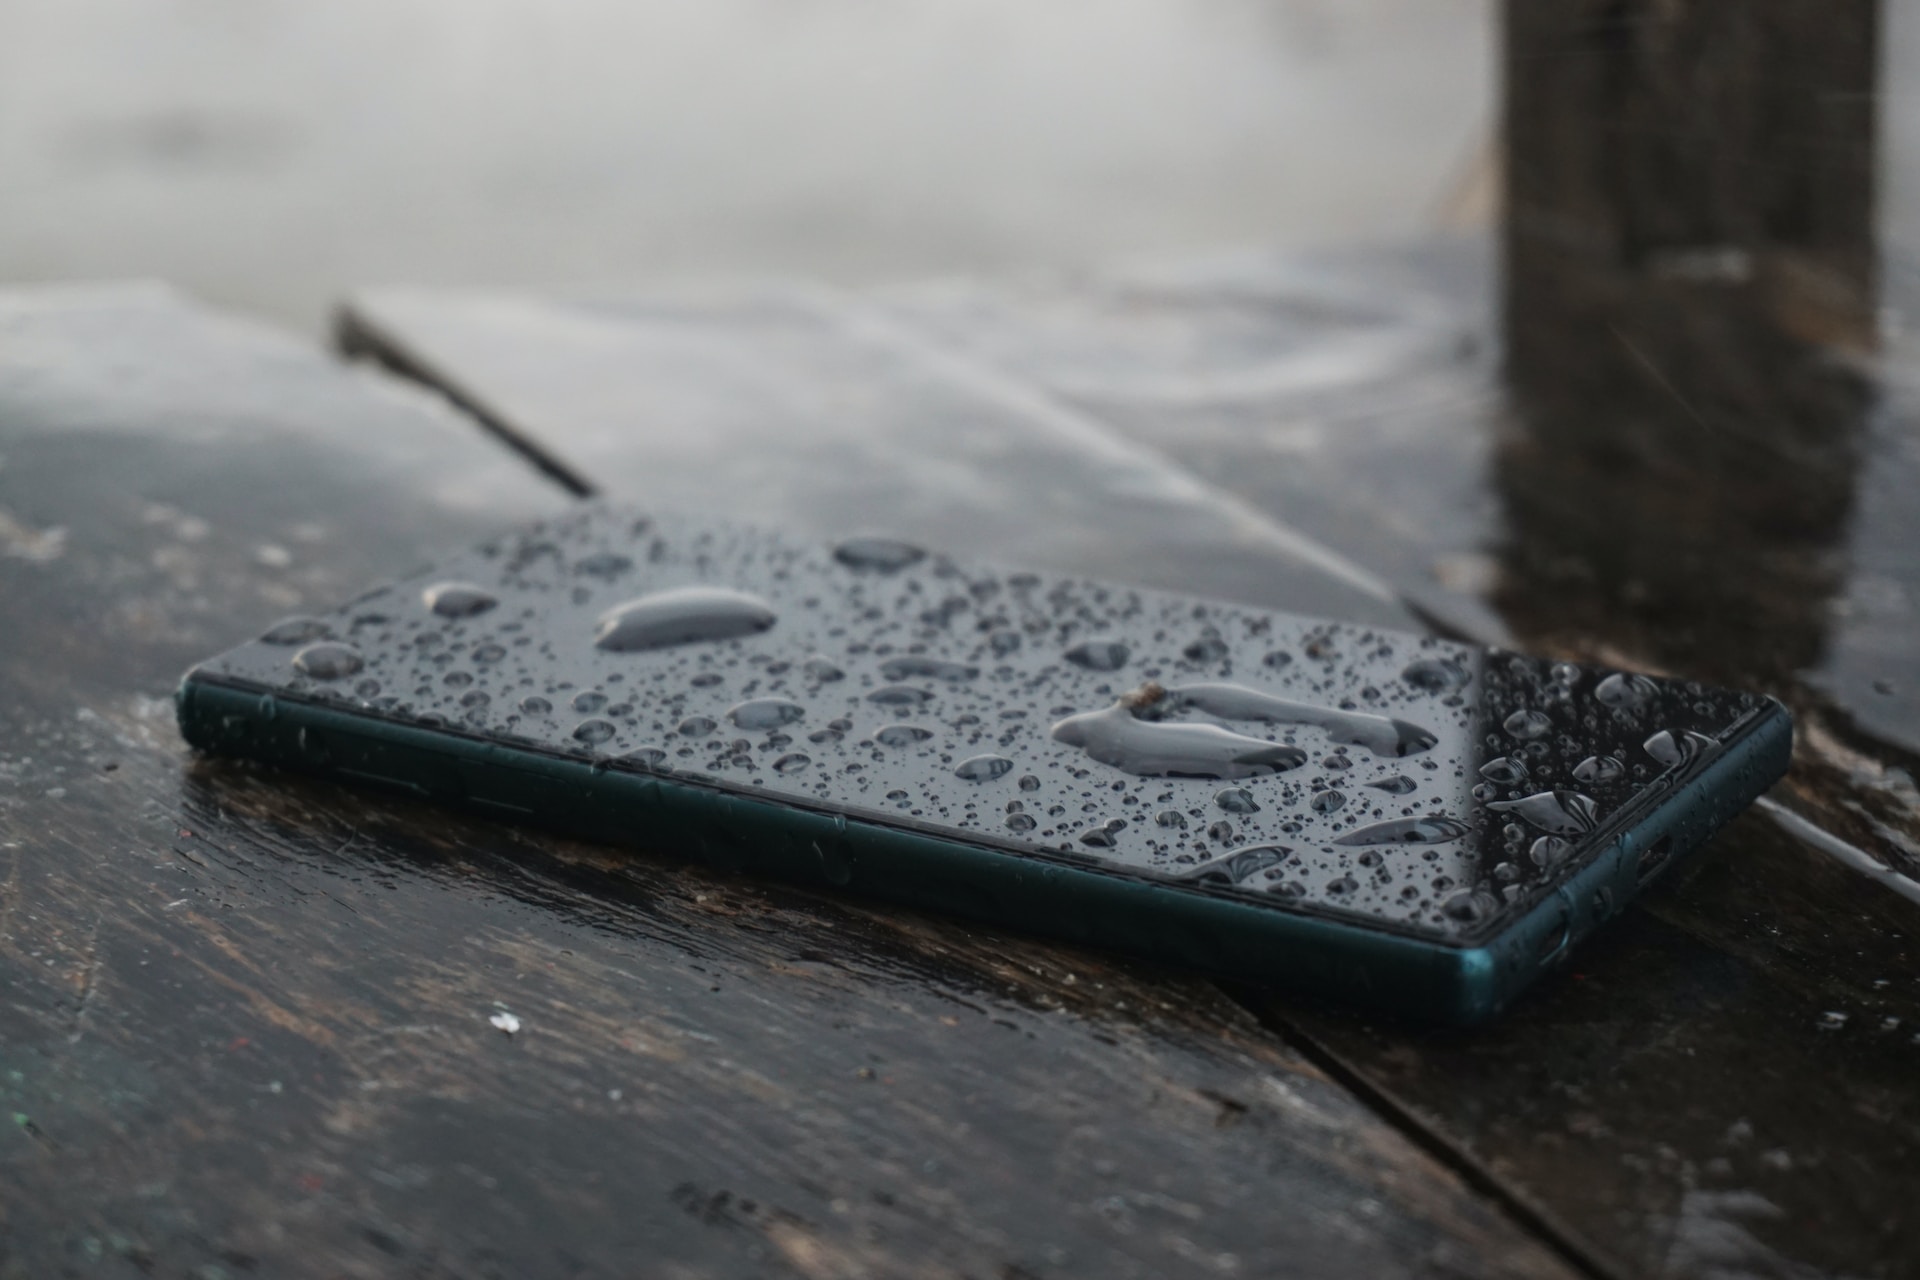 How to Use Water Eject, Plus Other Tips to Dry Out a Wet iPhone